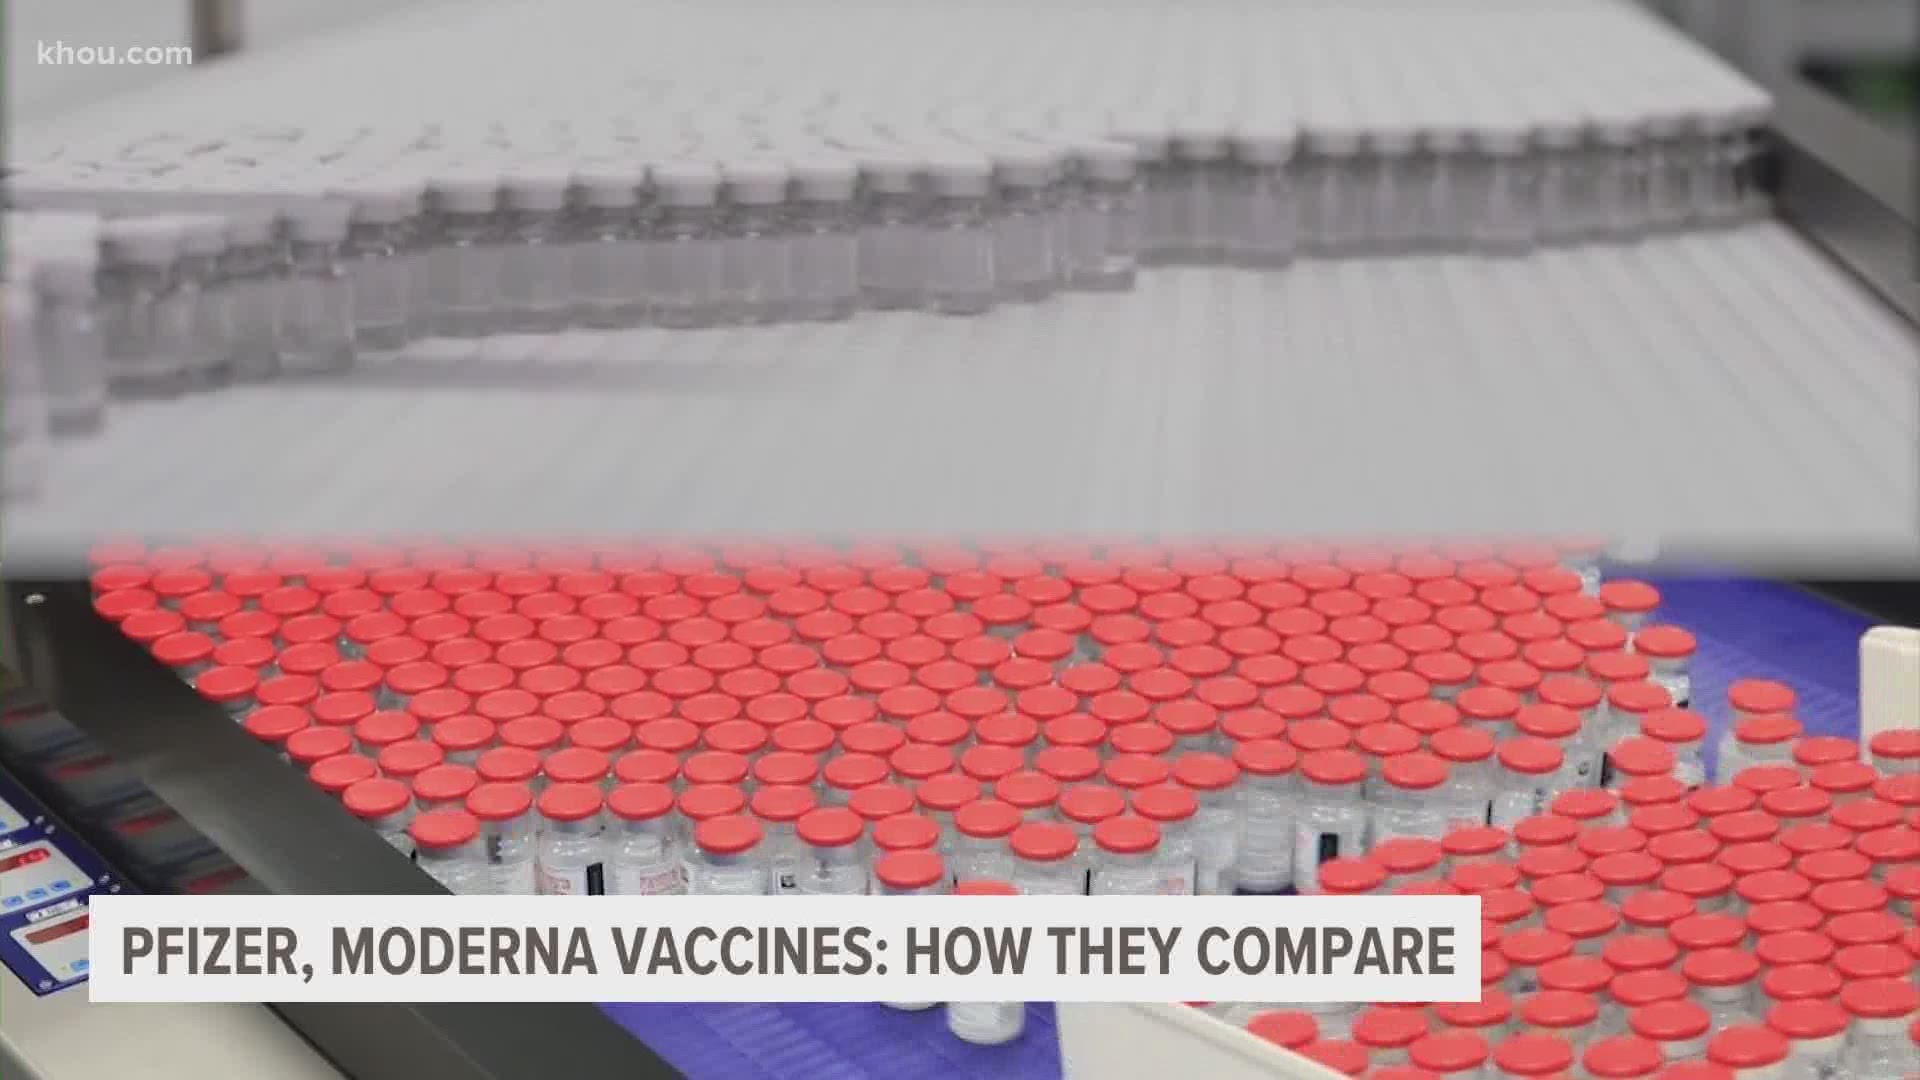 The FDA approved Moderna's vaccine on Friday, making it the second on the market, with two more expected by the end of January 2021.